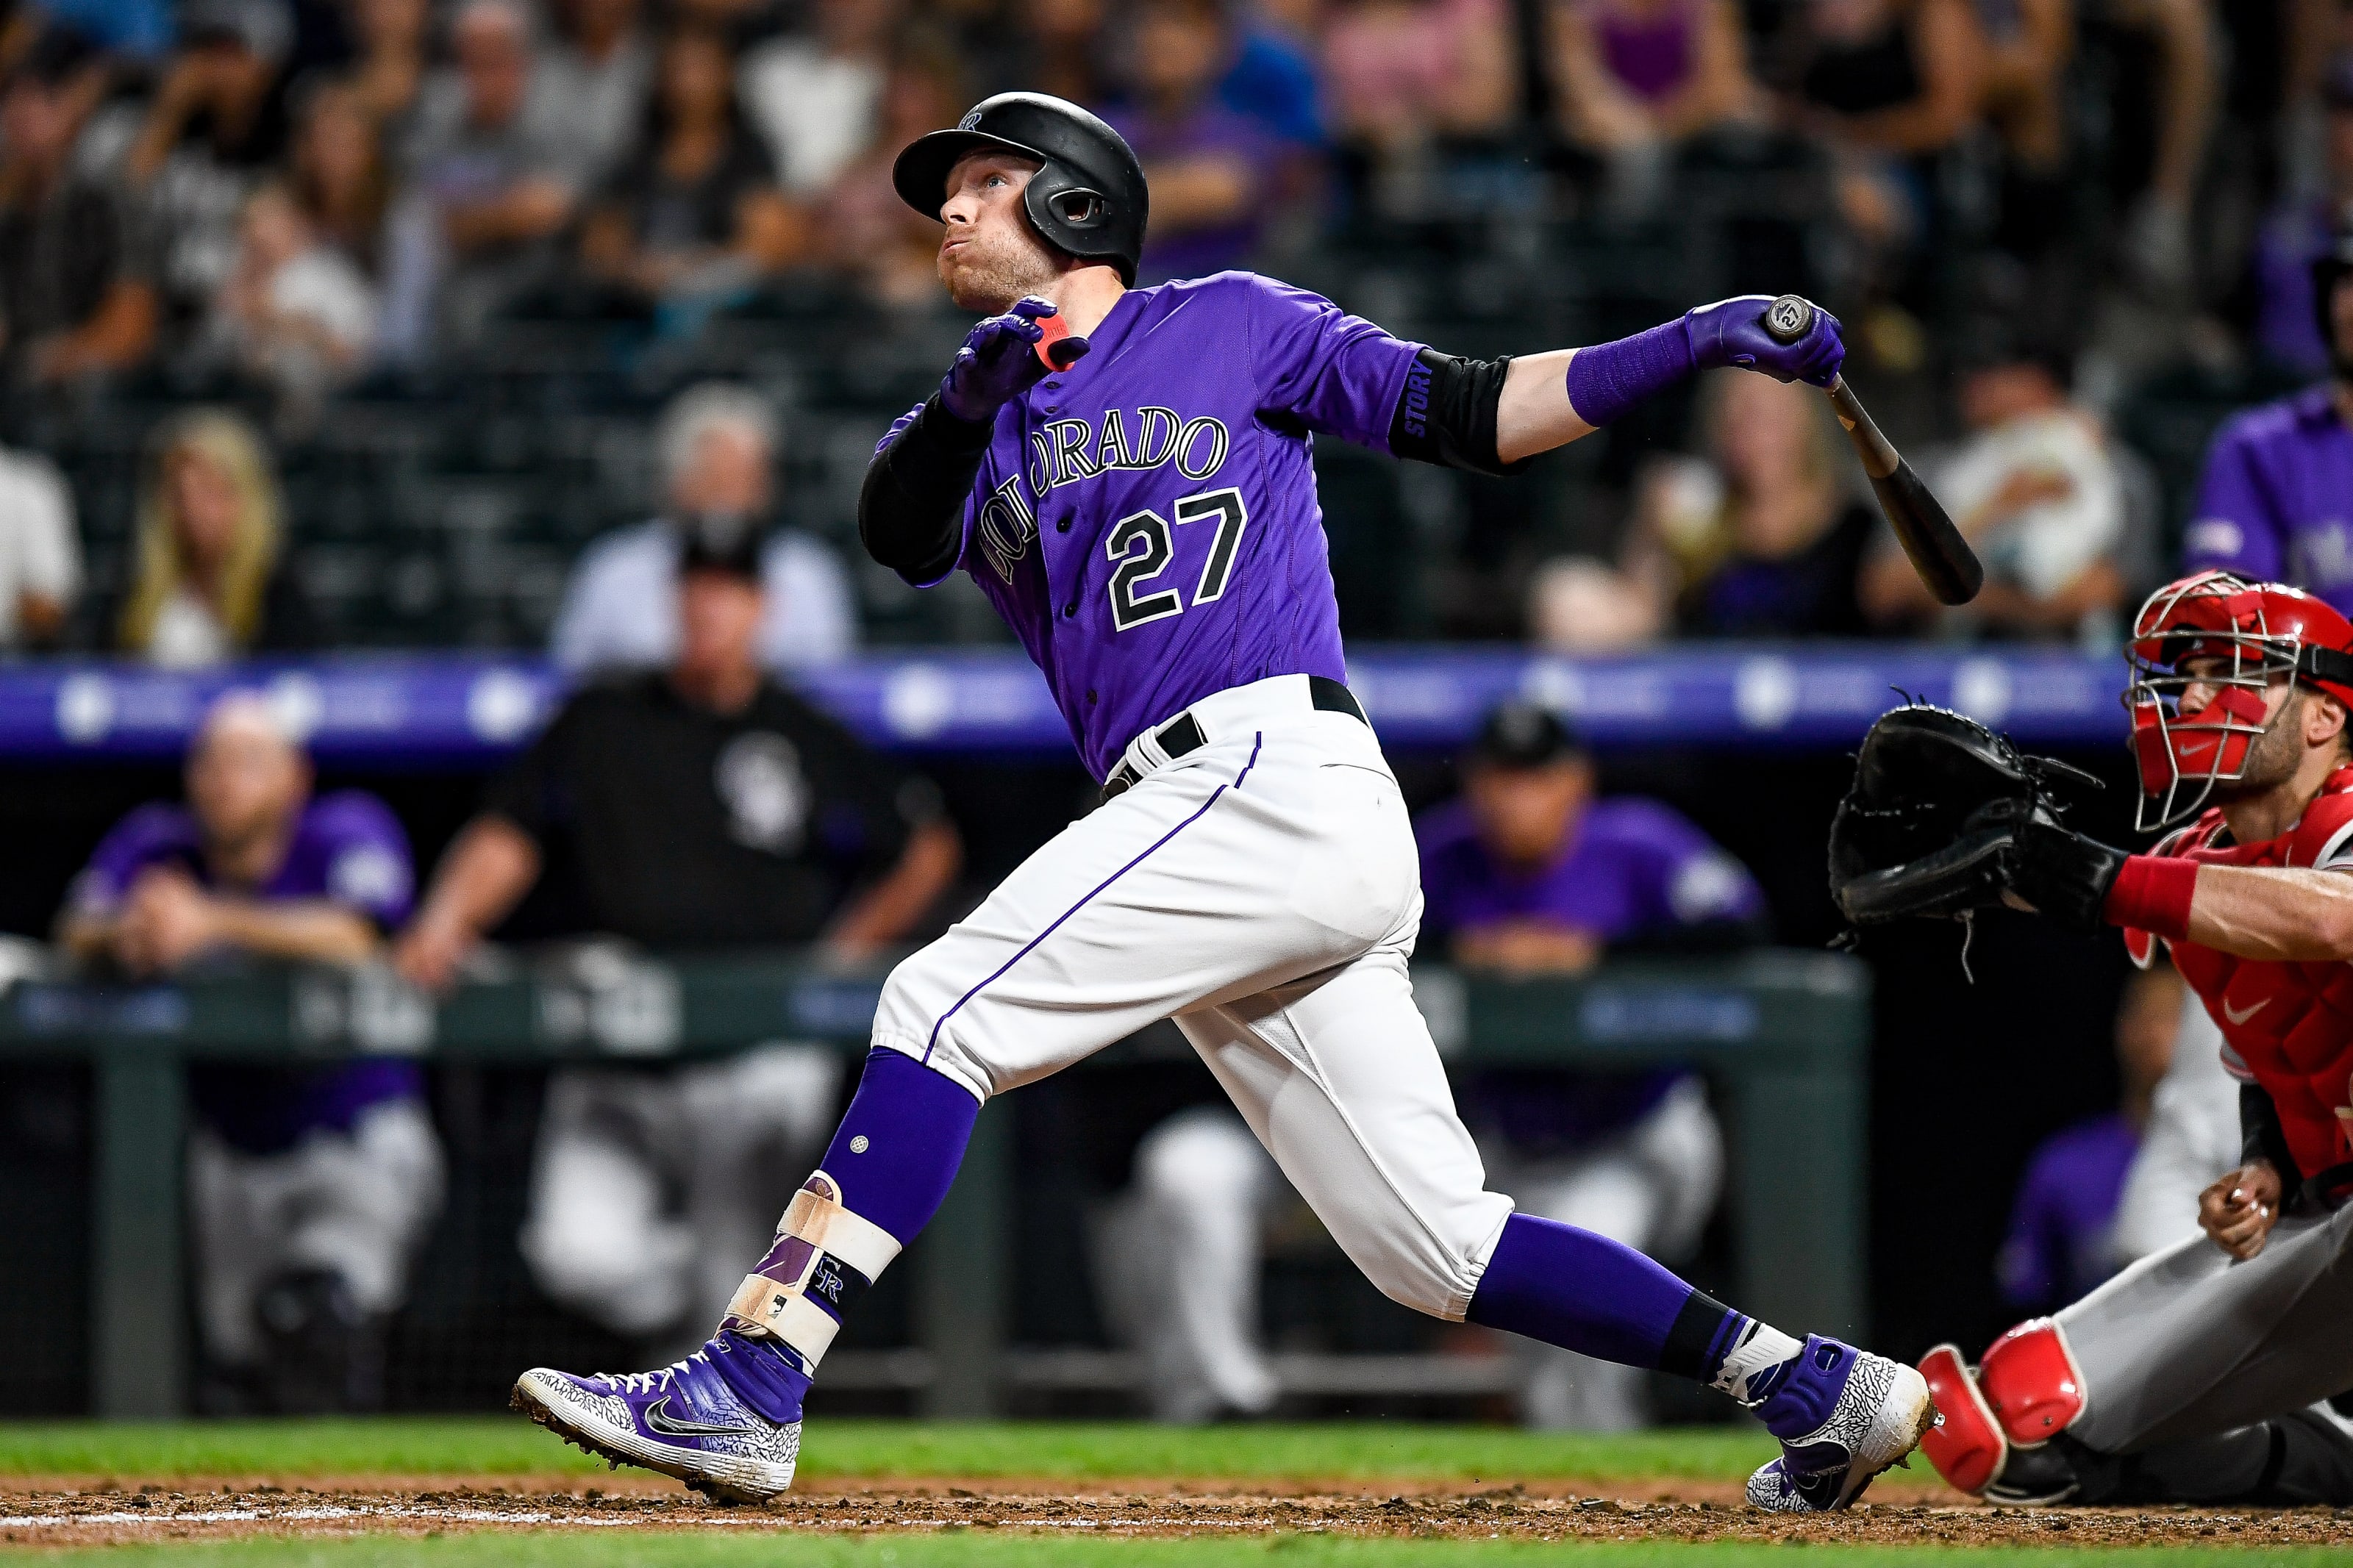 Trevor Story #27 of the Colorado Rockies hits a fifth inning leadoff homer against the Cincinnati Reds.